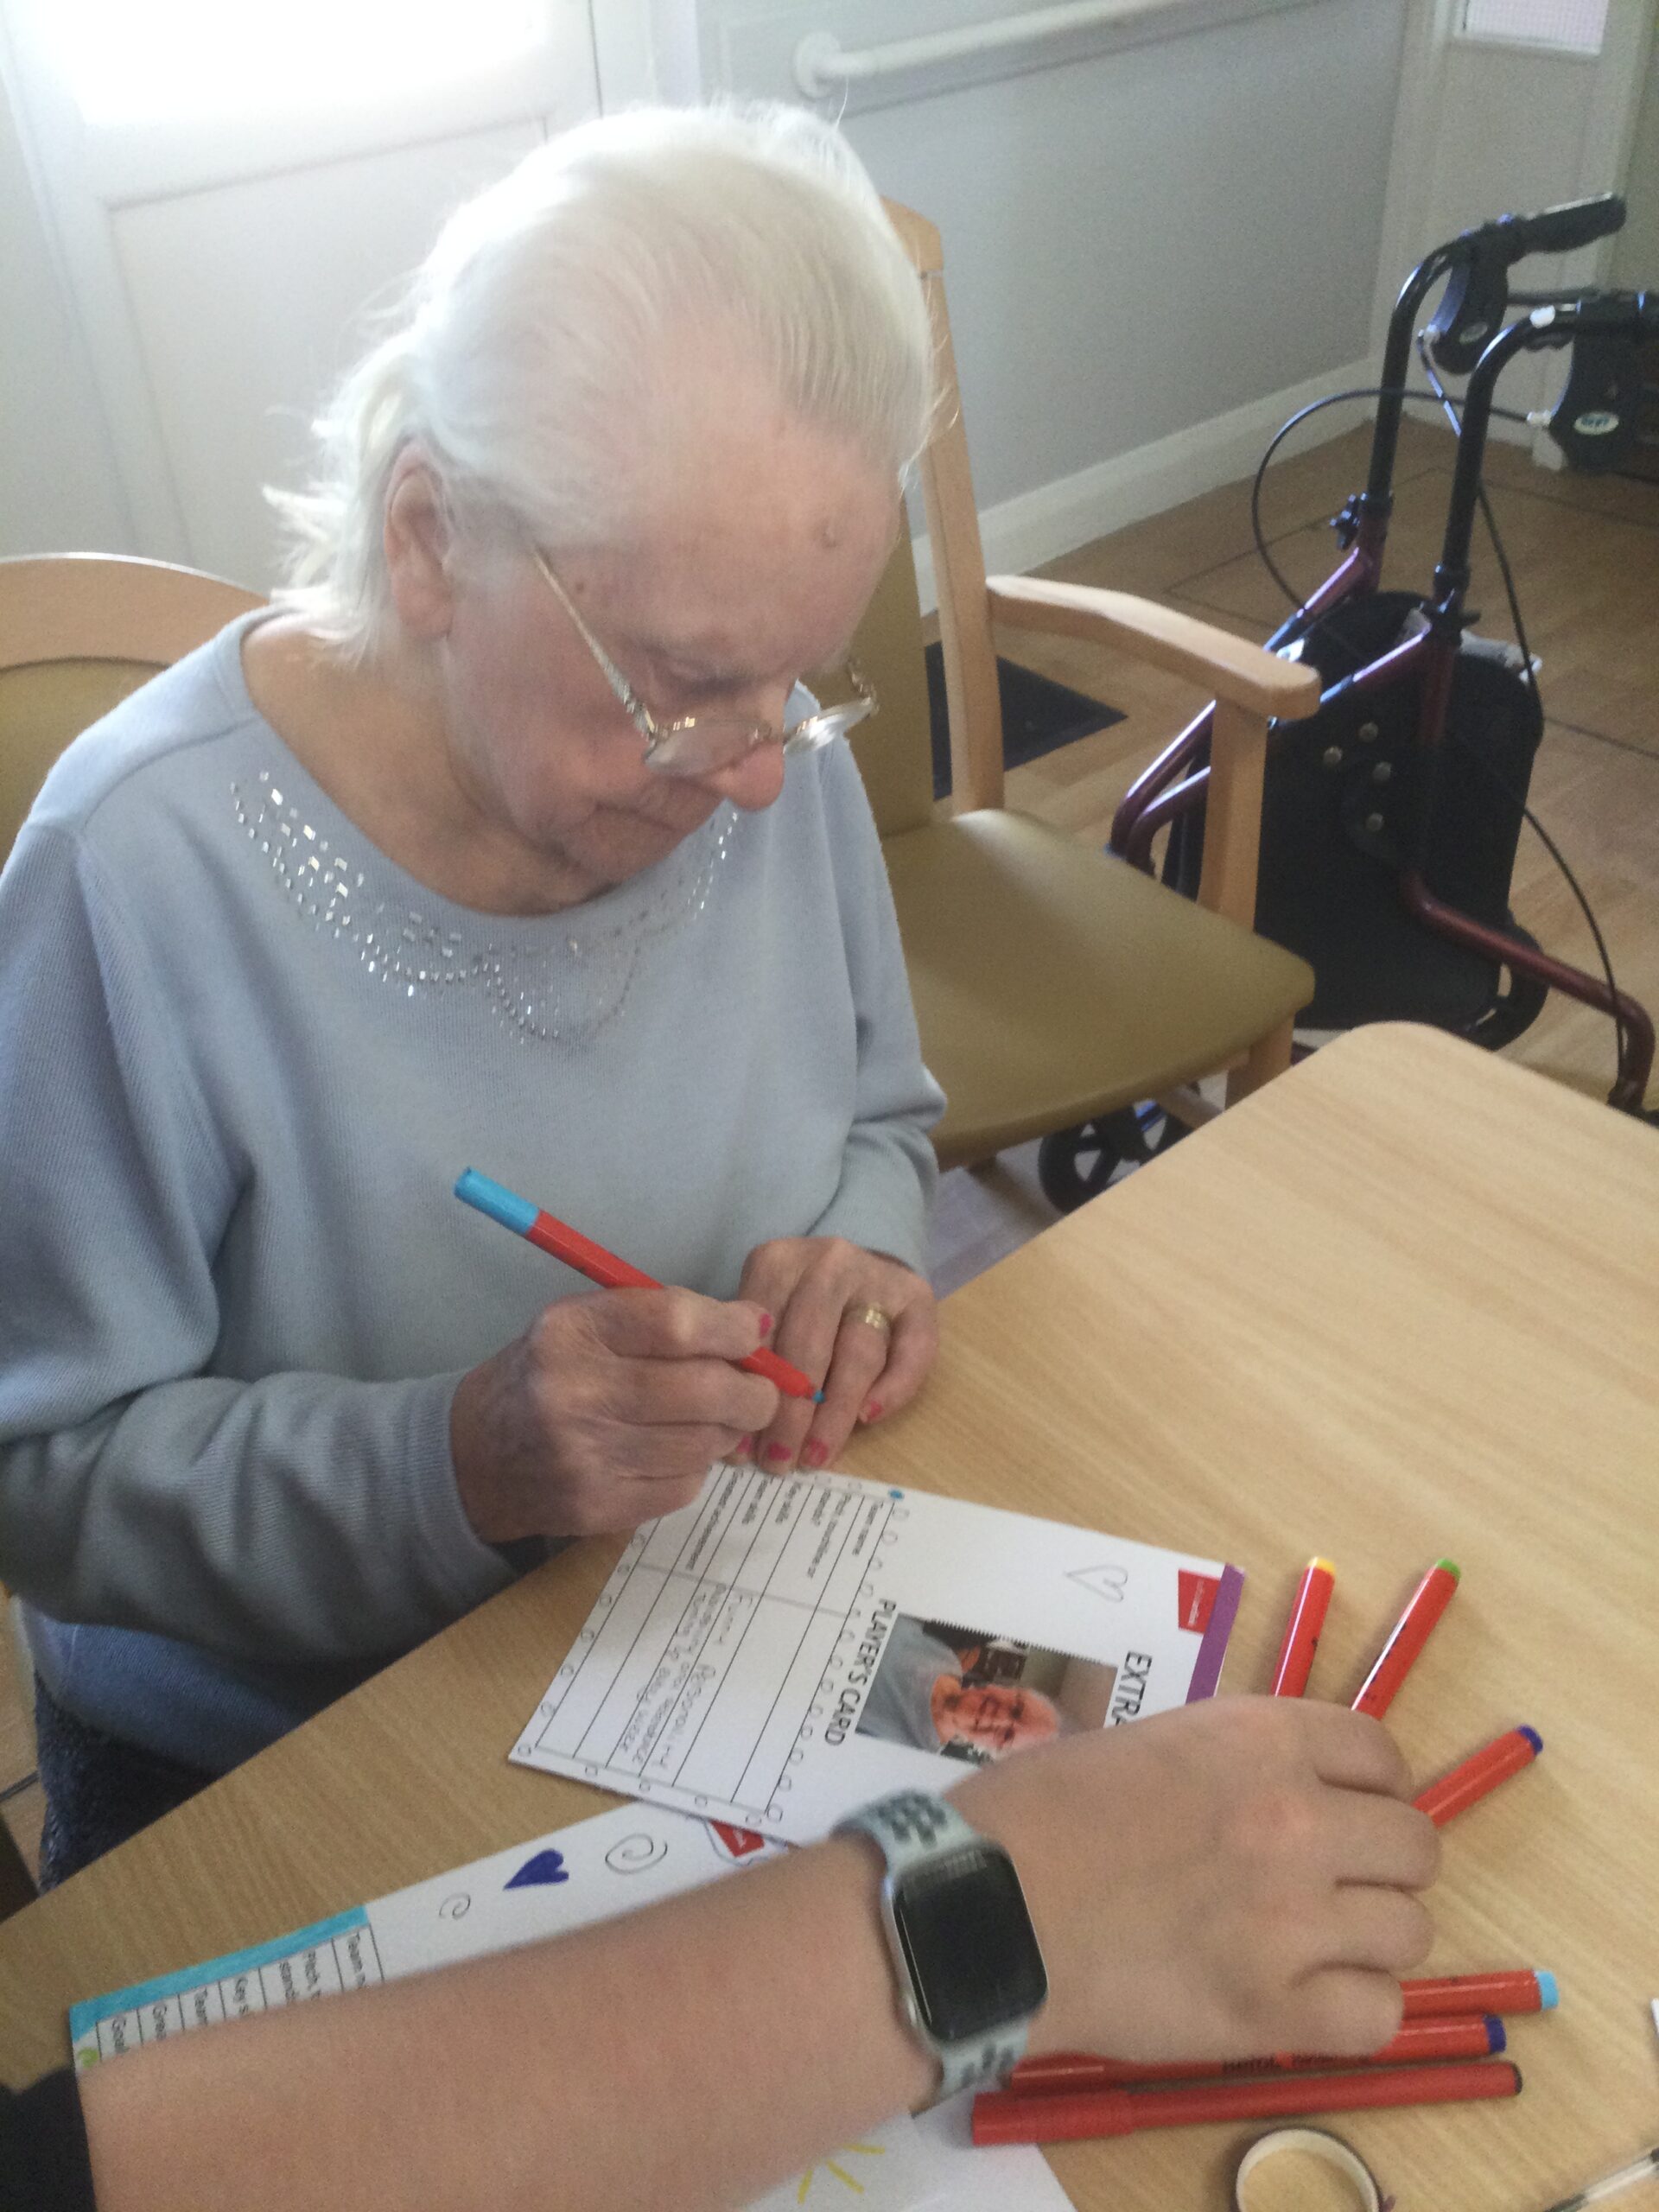 A woman in a light blue jumper with silver stitching around the neck is holding a pen, about to write something on the card in front of her. Another hand stretches in front of her, picking up a coloured pen from the table.